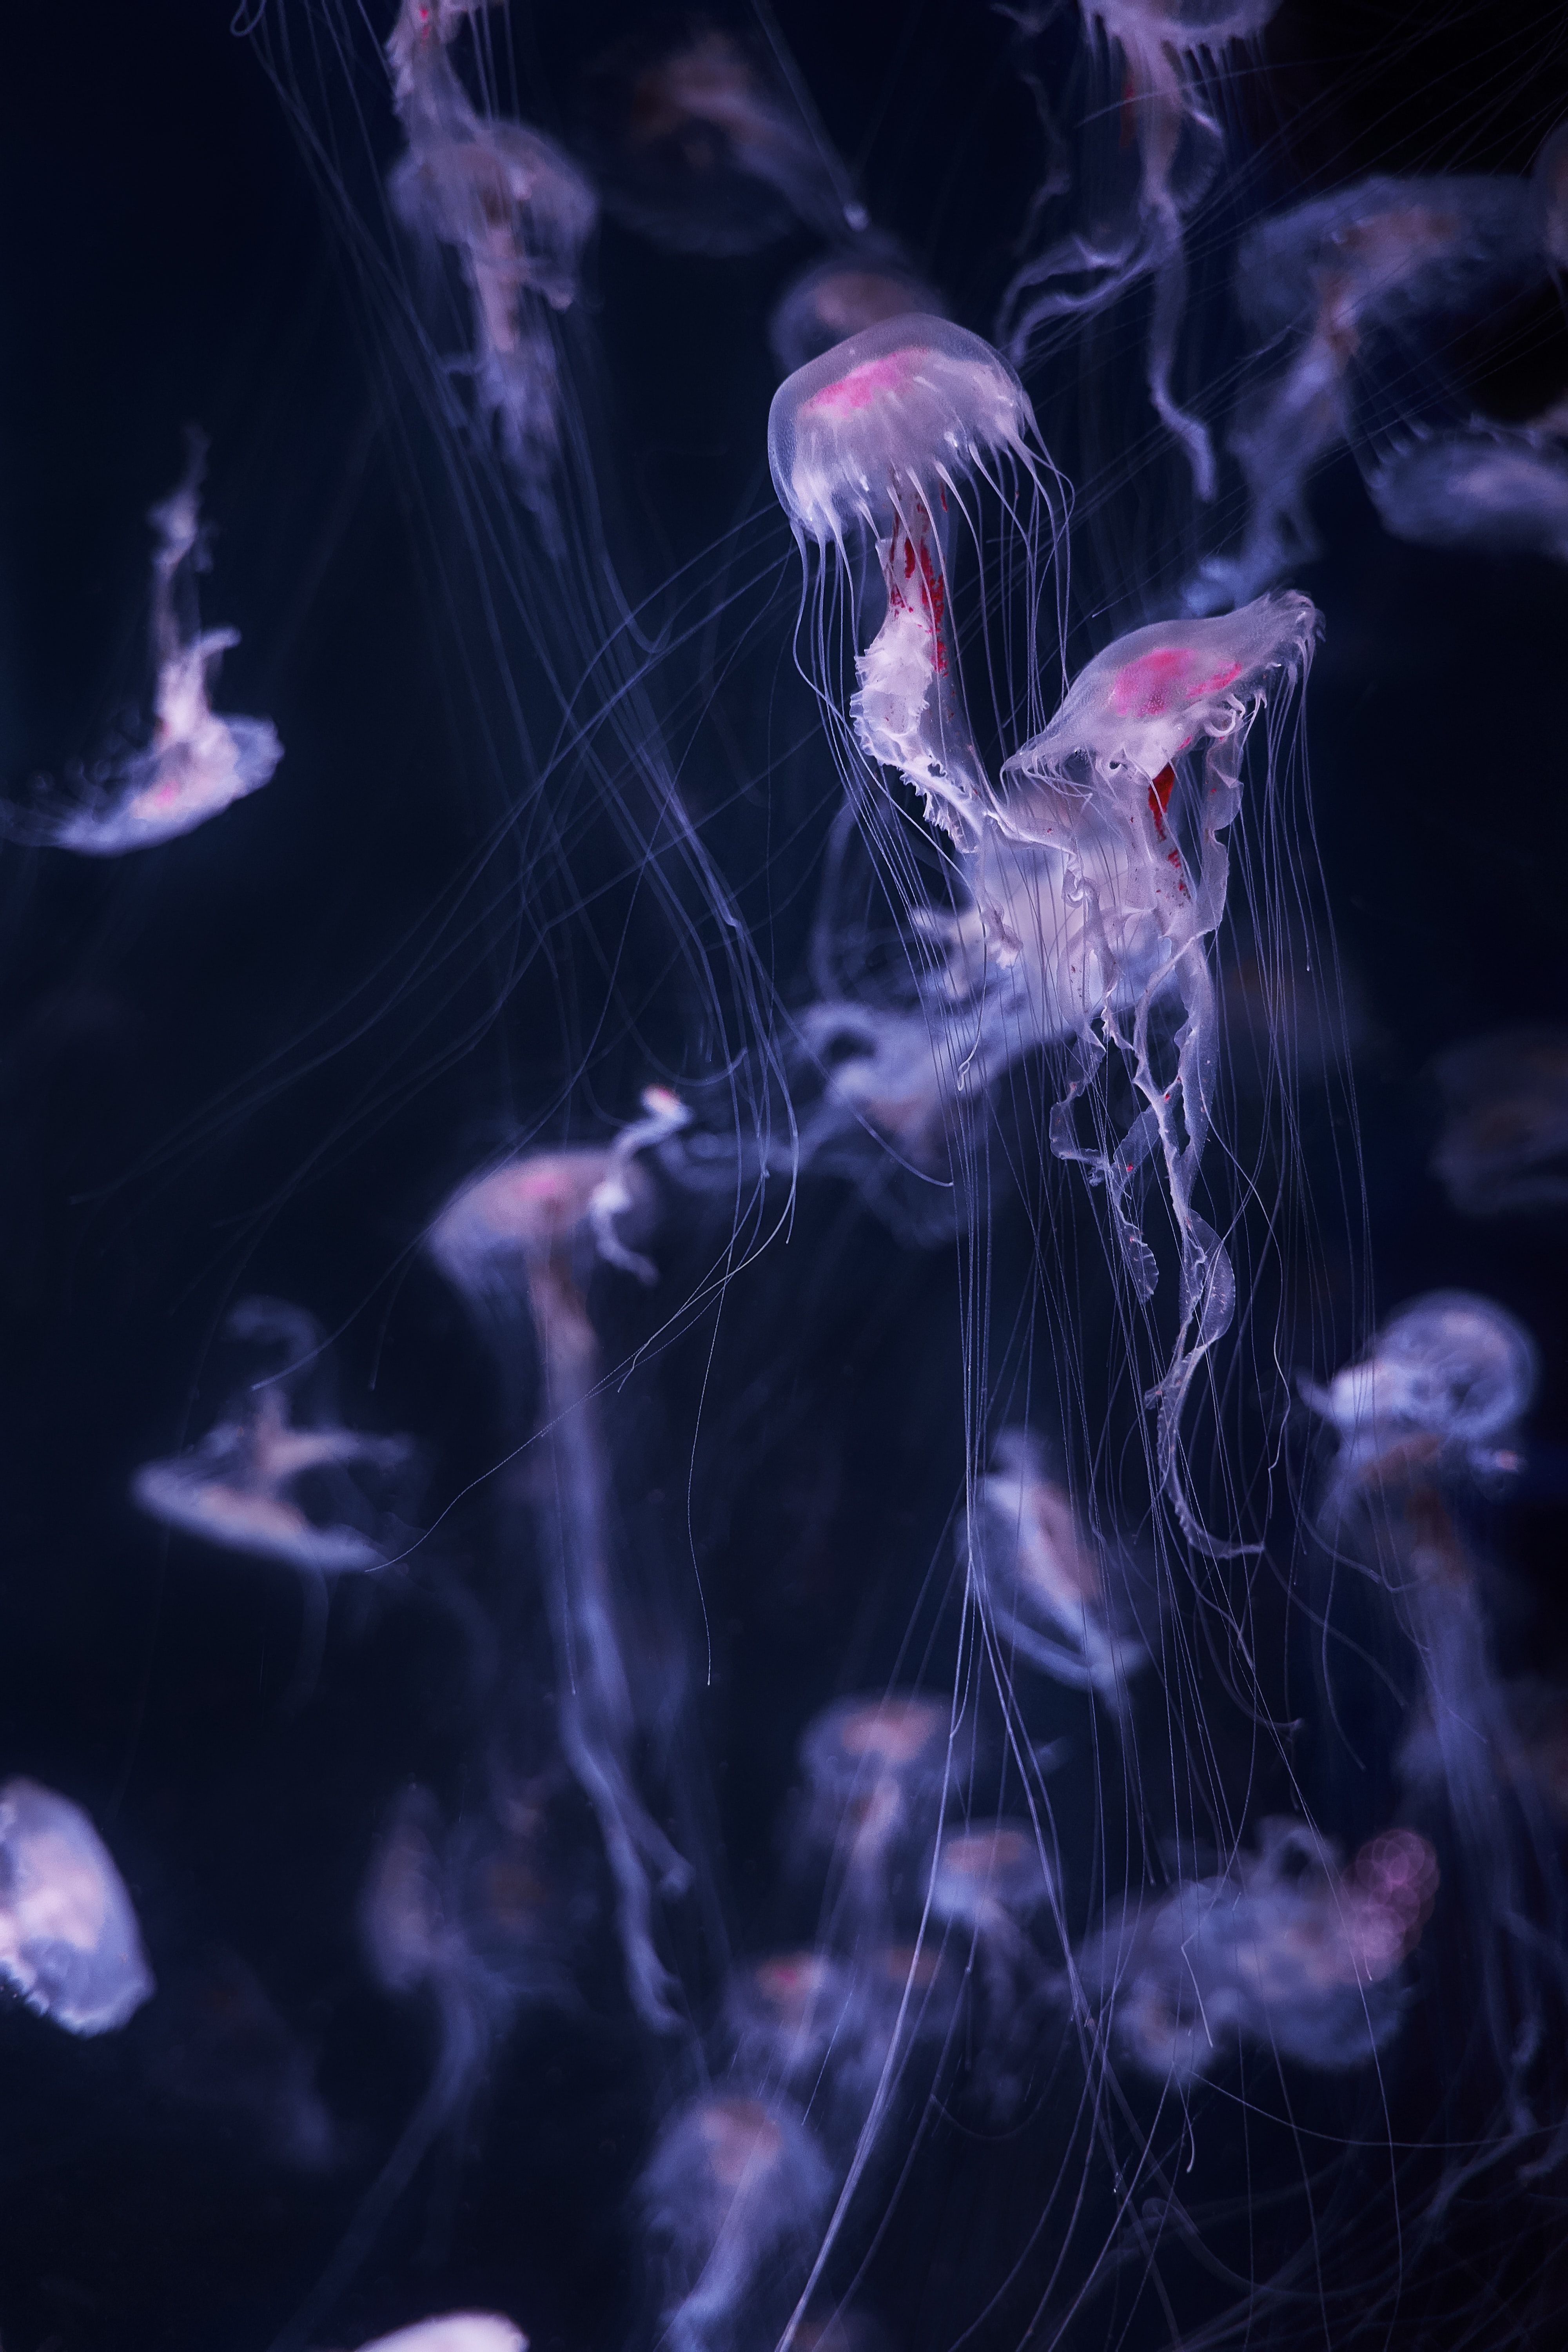 A group of jellyfish swimming in the ocean - Jellyfish